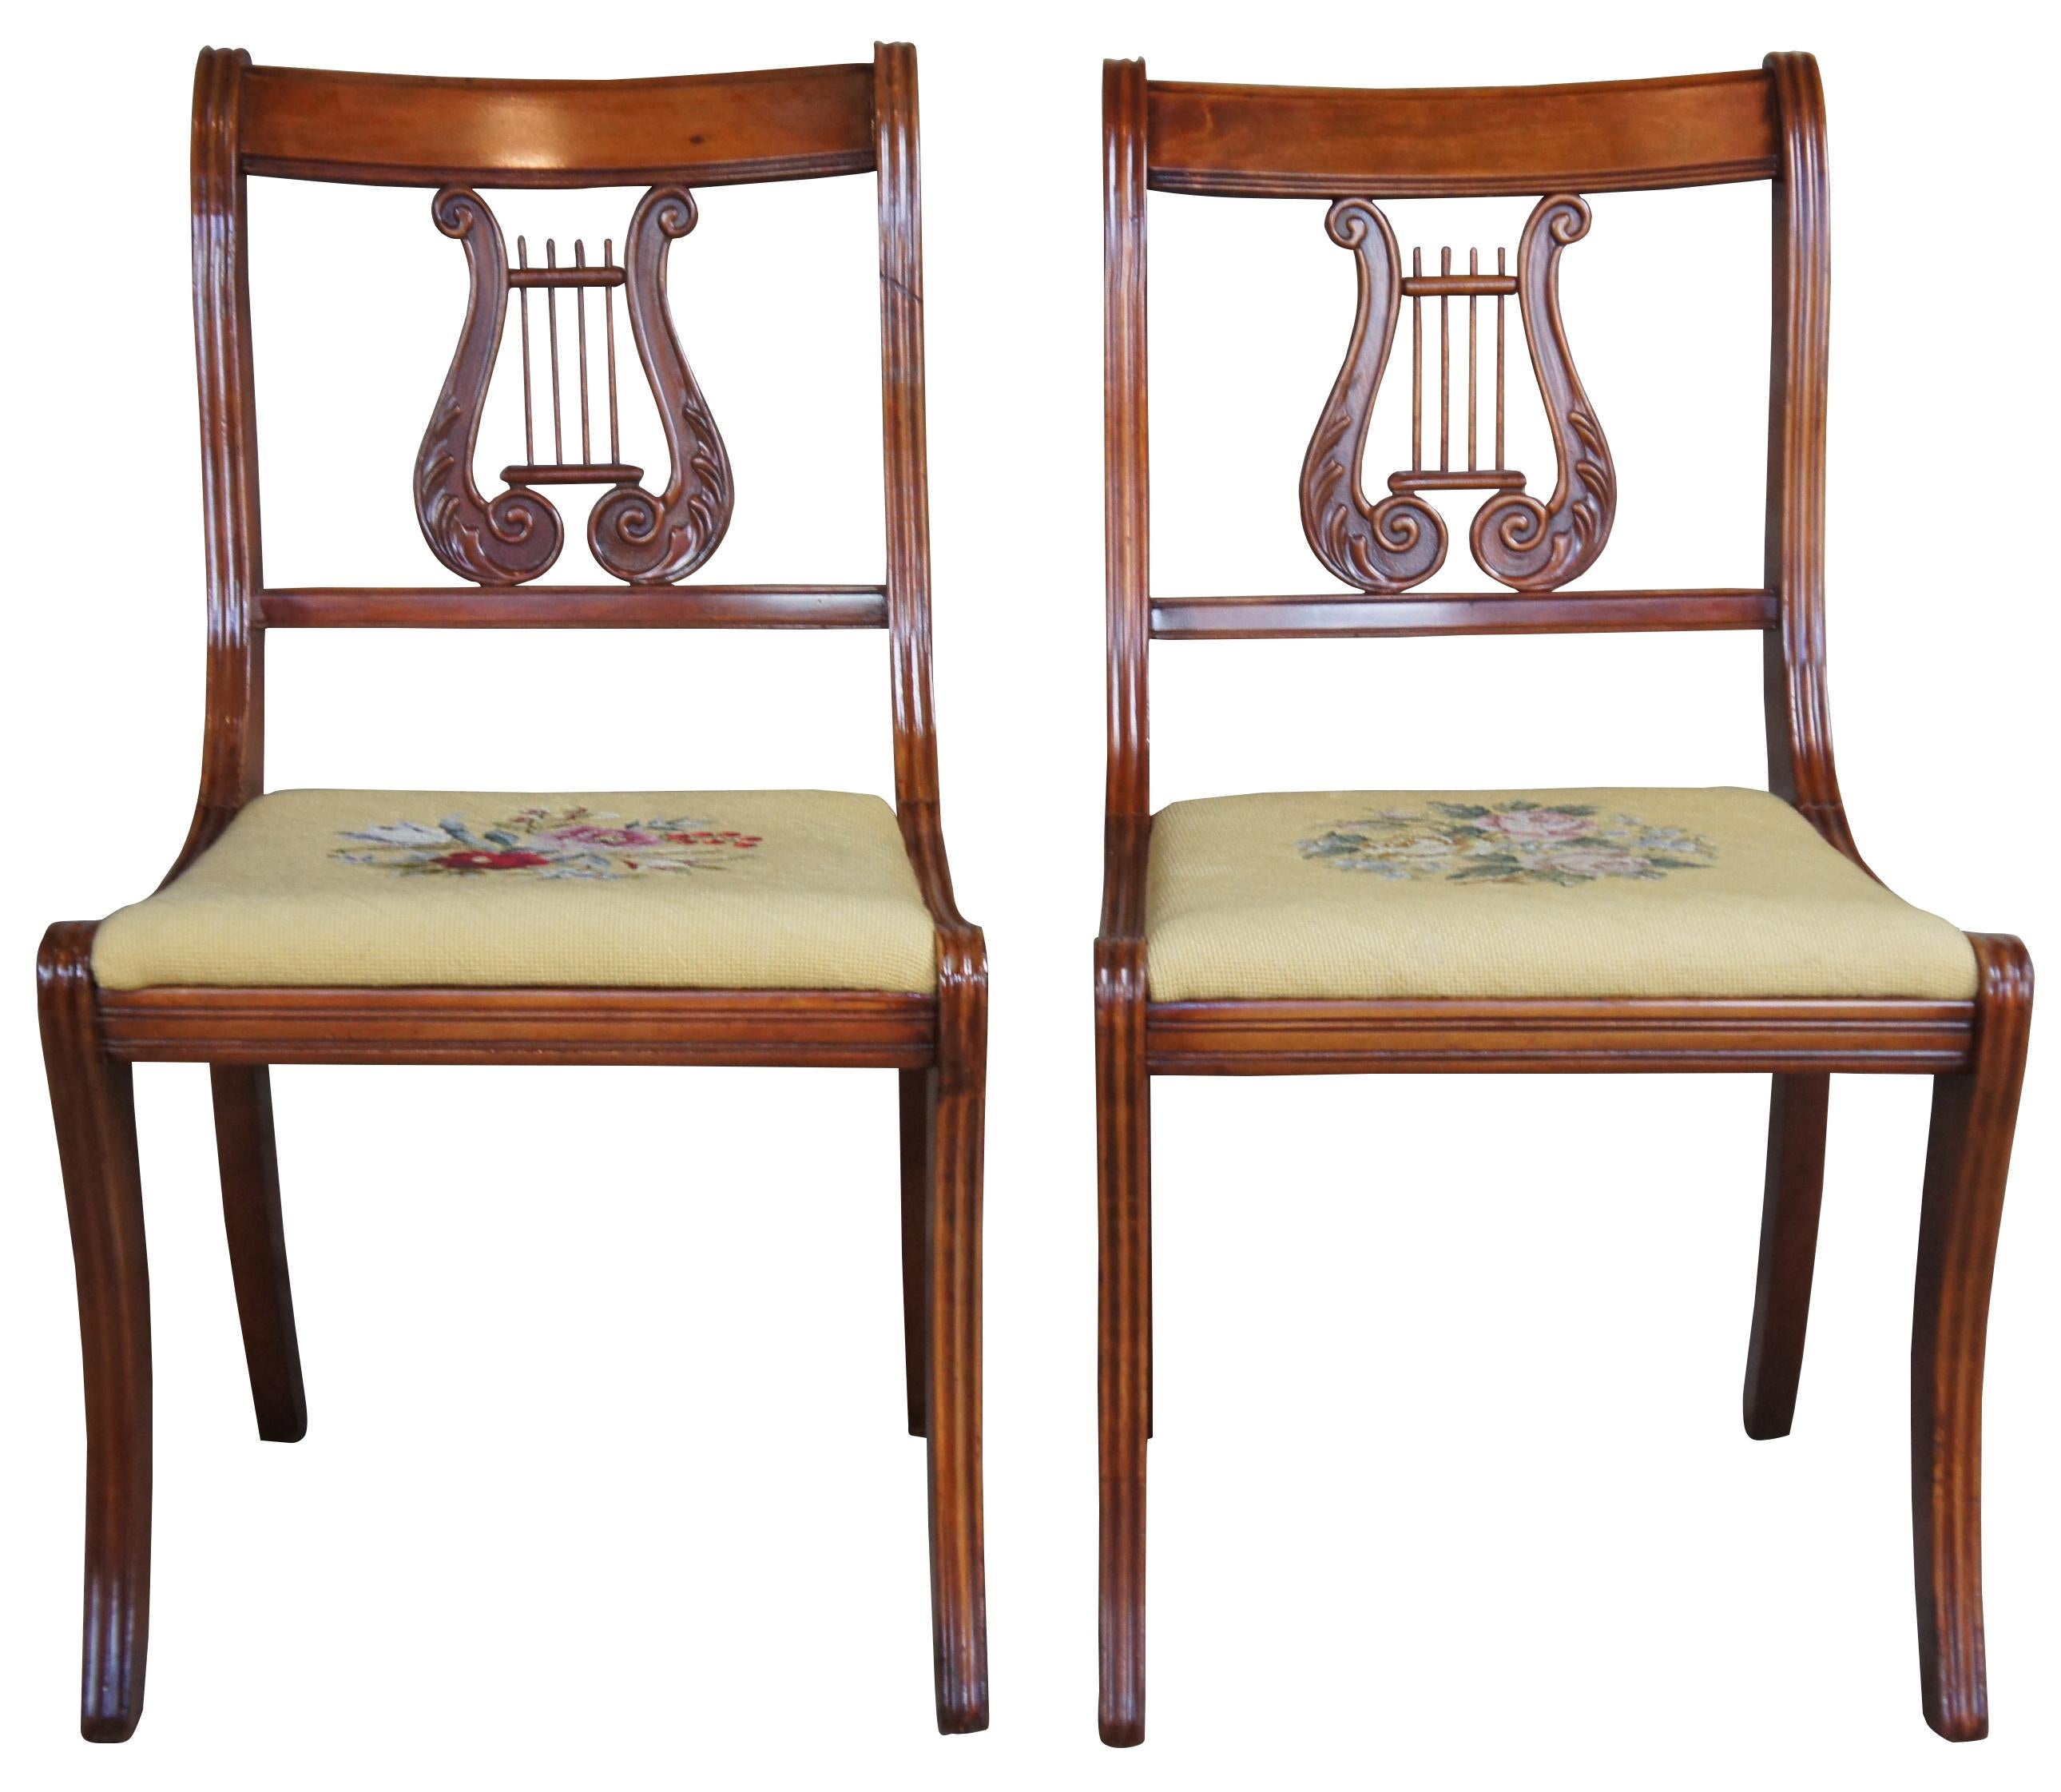 Pair of two antique R.H Macy & Co. side chairs, circa 1900s. Made of cherry, featuring a yellow floral needlepoint embroidered seat and harp back.
   